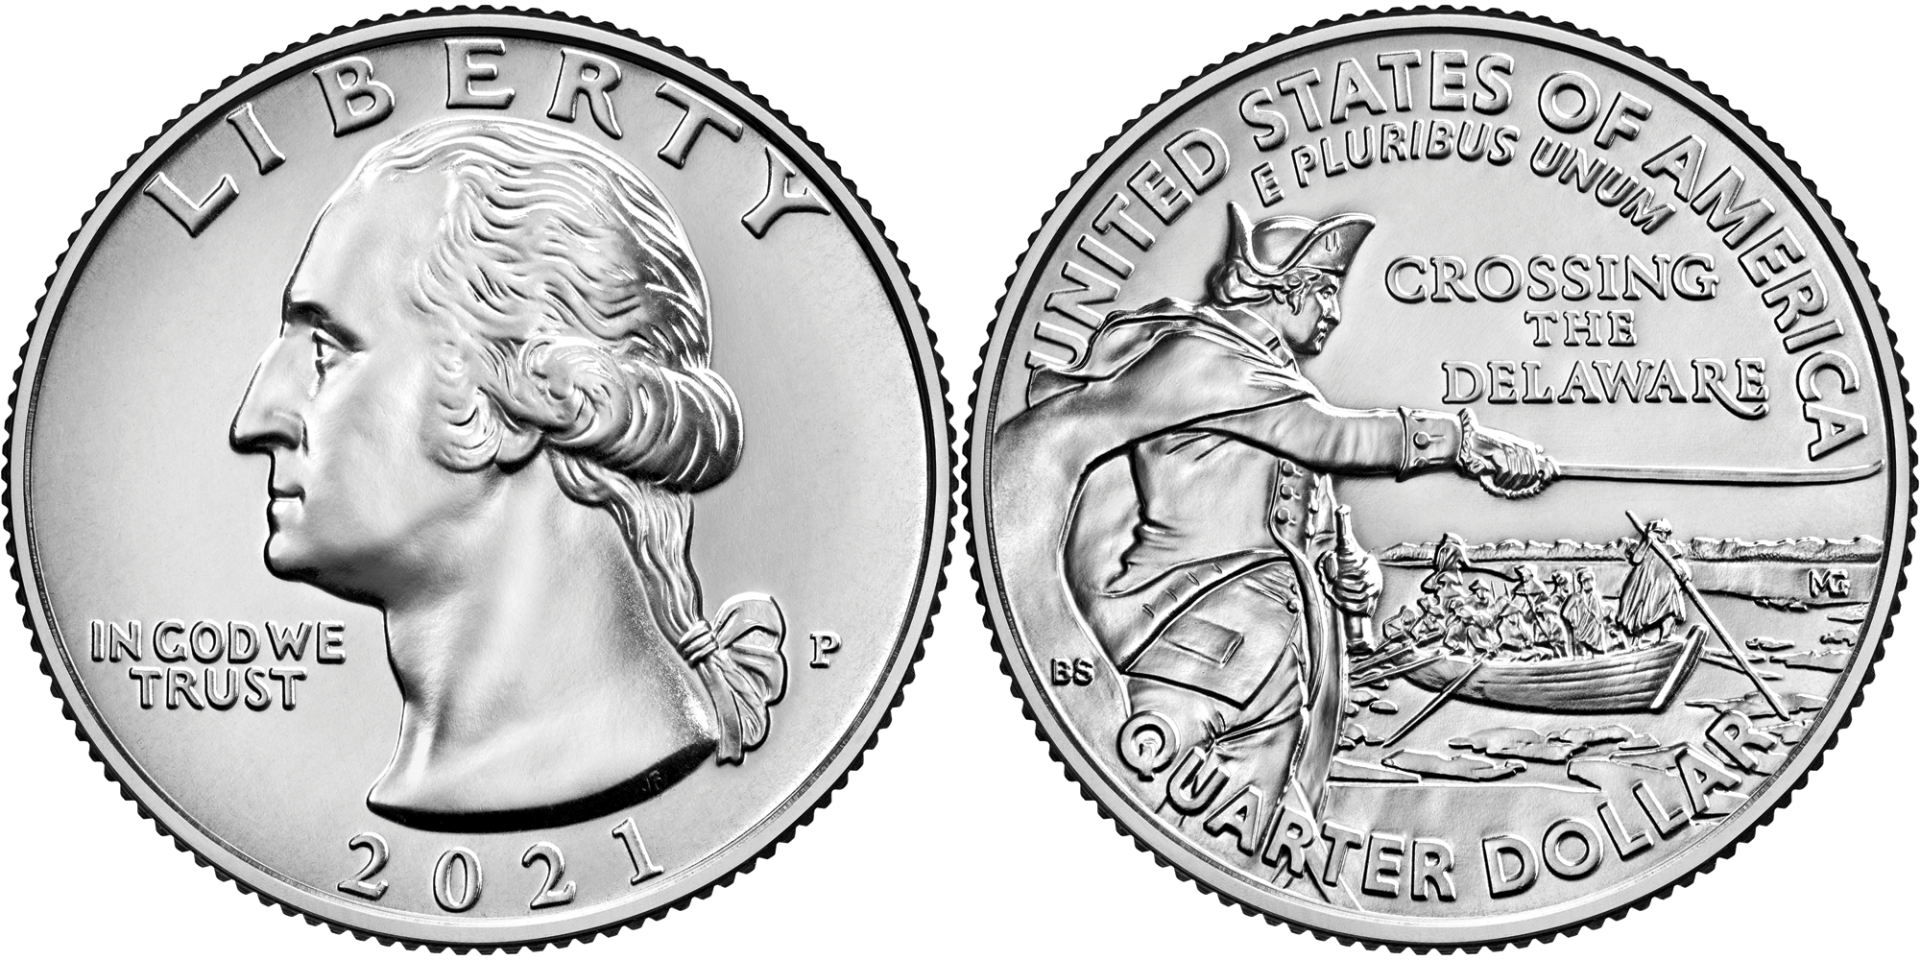 The obverse and reverse of a U.S. Quarter